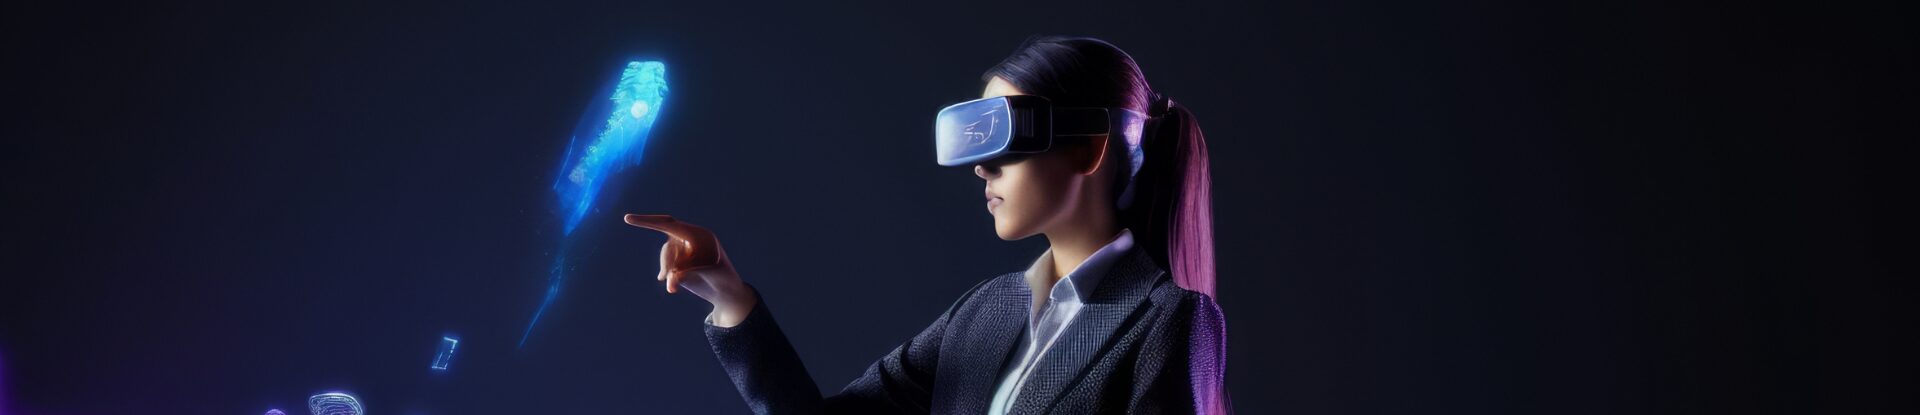 Innovating Beyond the Obvious: How AEC Can Truly Benefit from Immersive Technologies